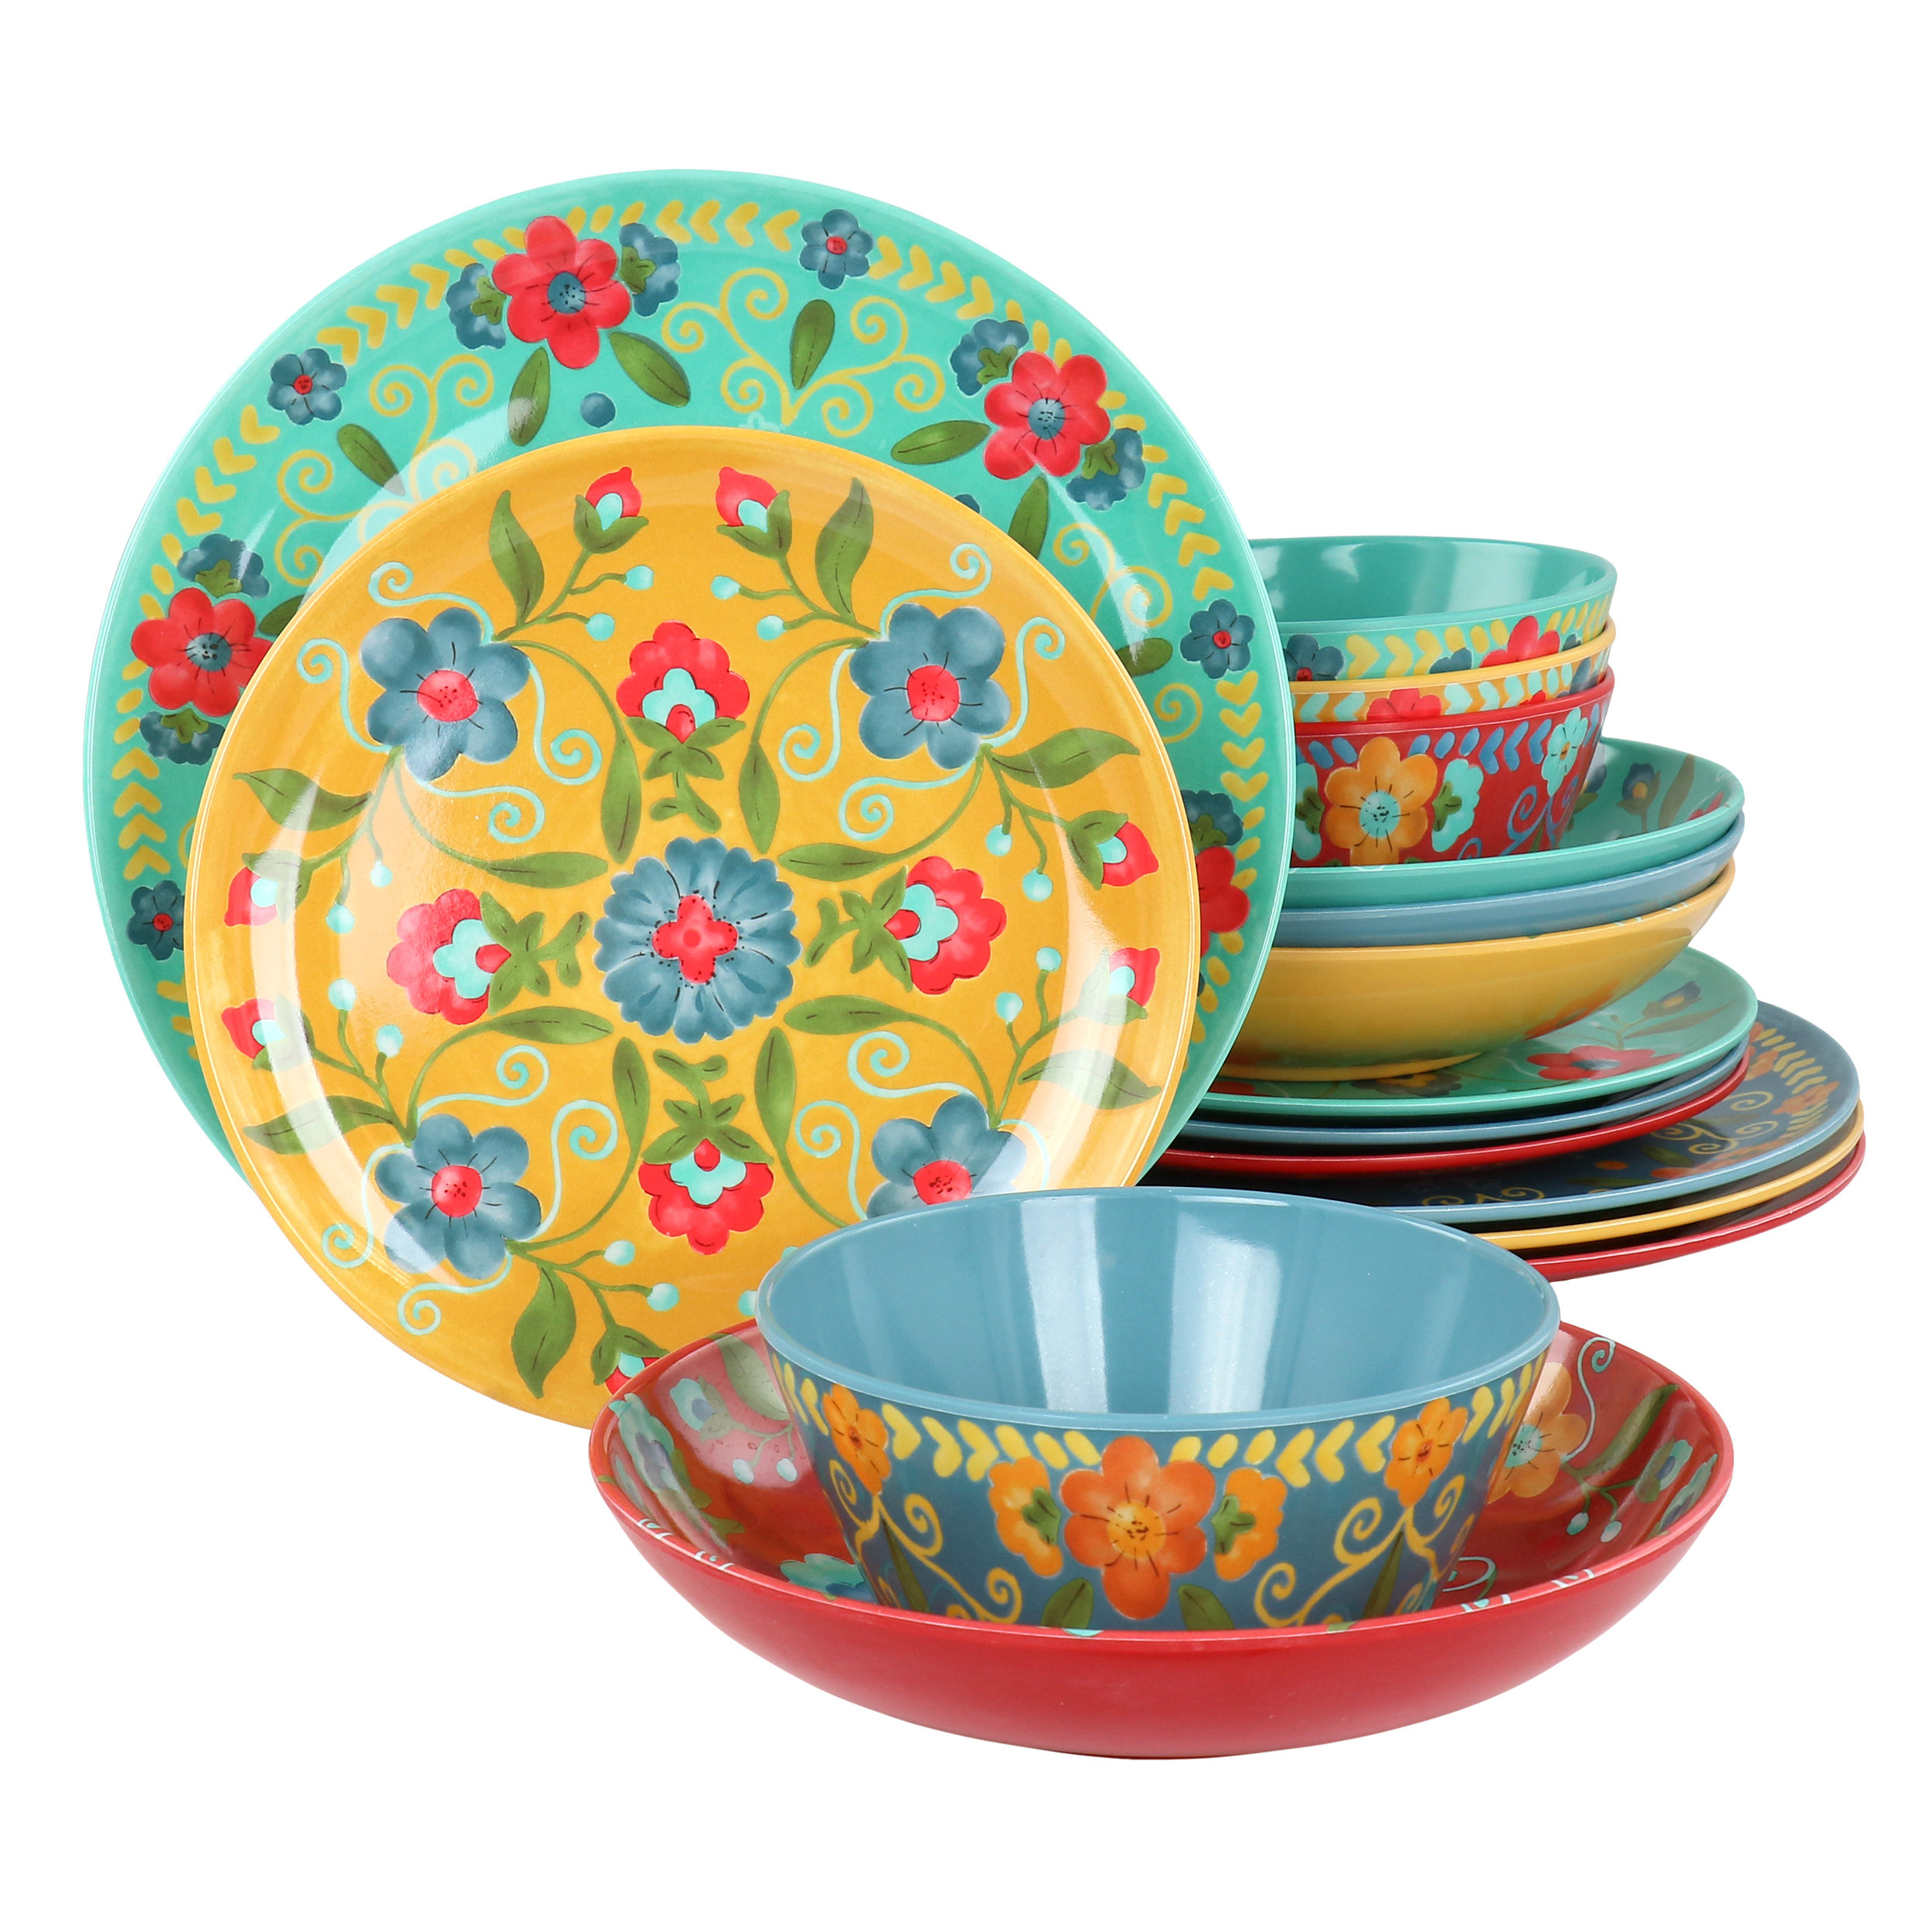 Spice by Tia Mowry Floral Cinnamon Twist 12 Piece Melamine Dinnerware Set  in Assorted Colors